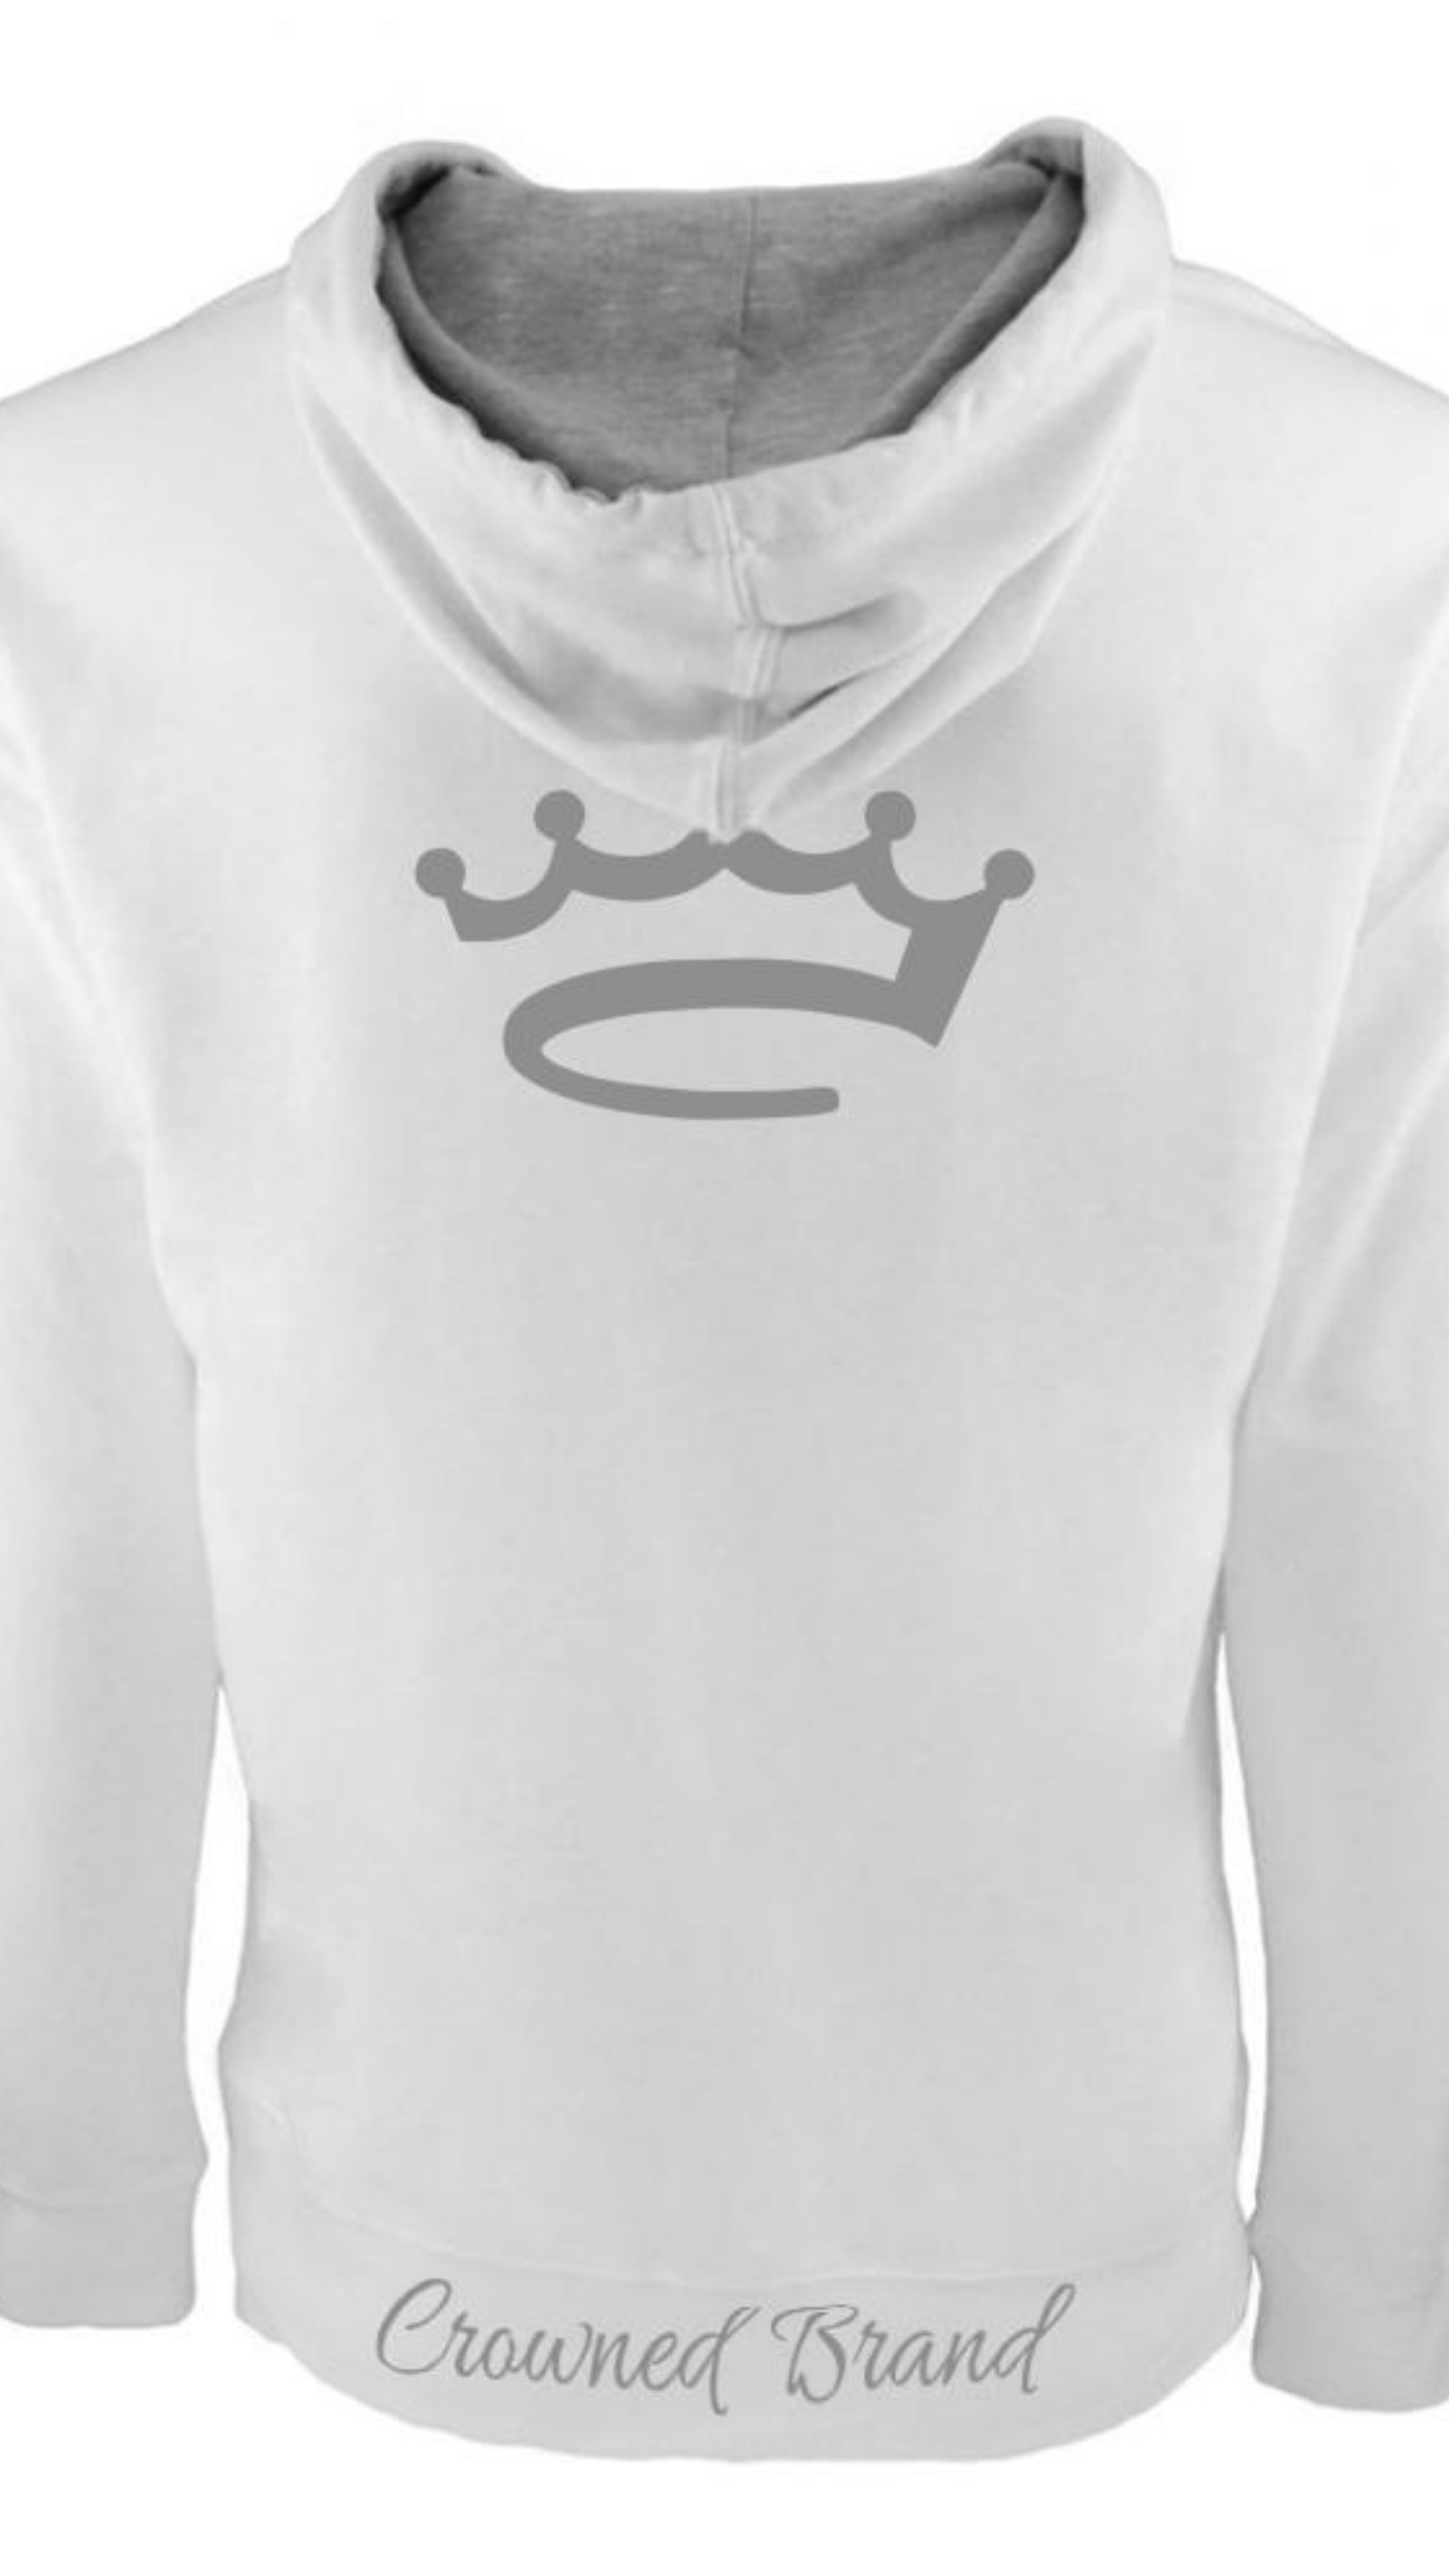 White / Grey - Crowned Brand ™